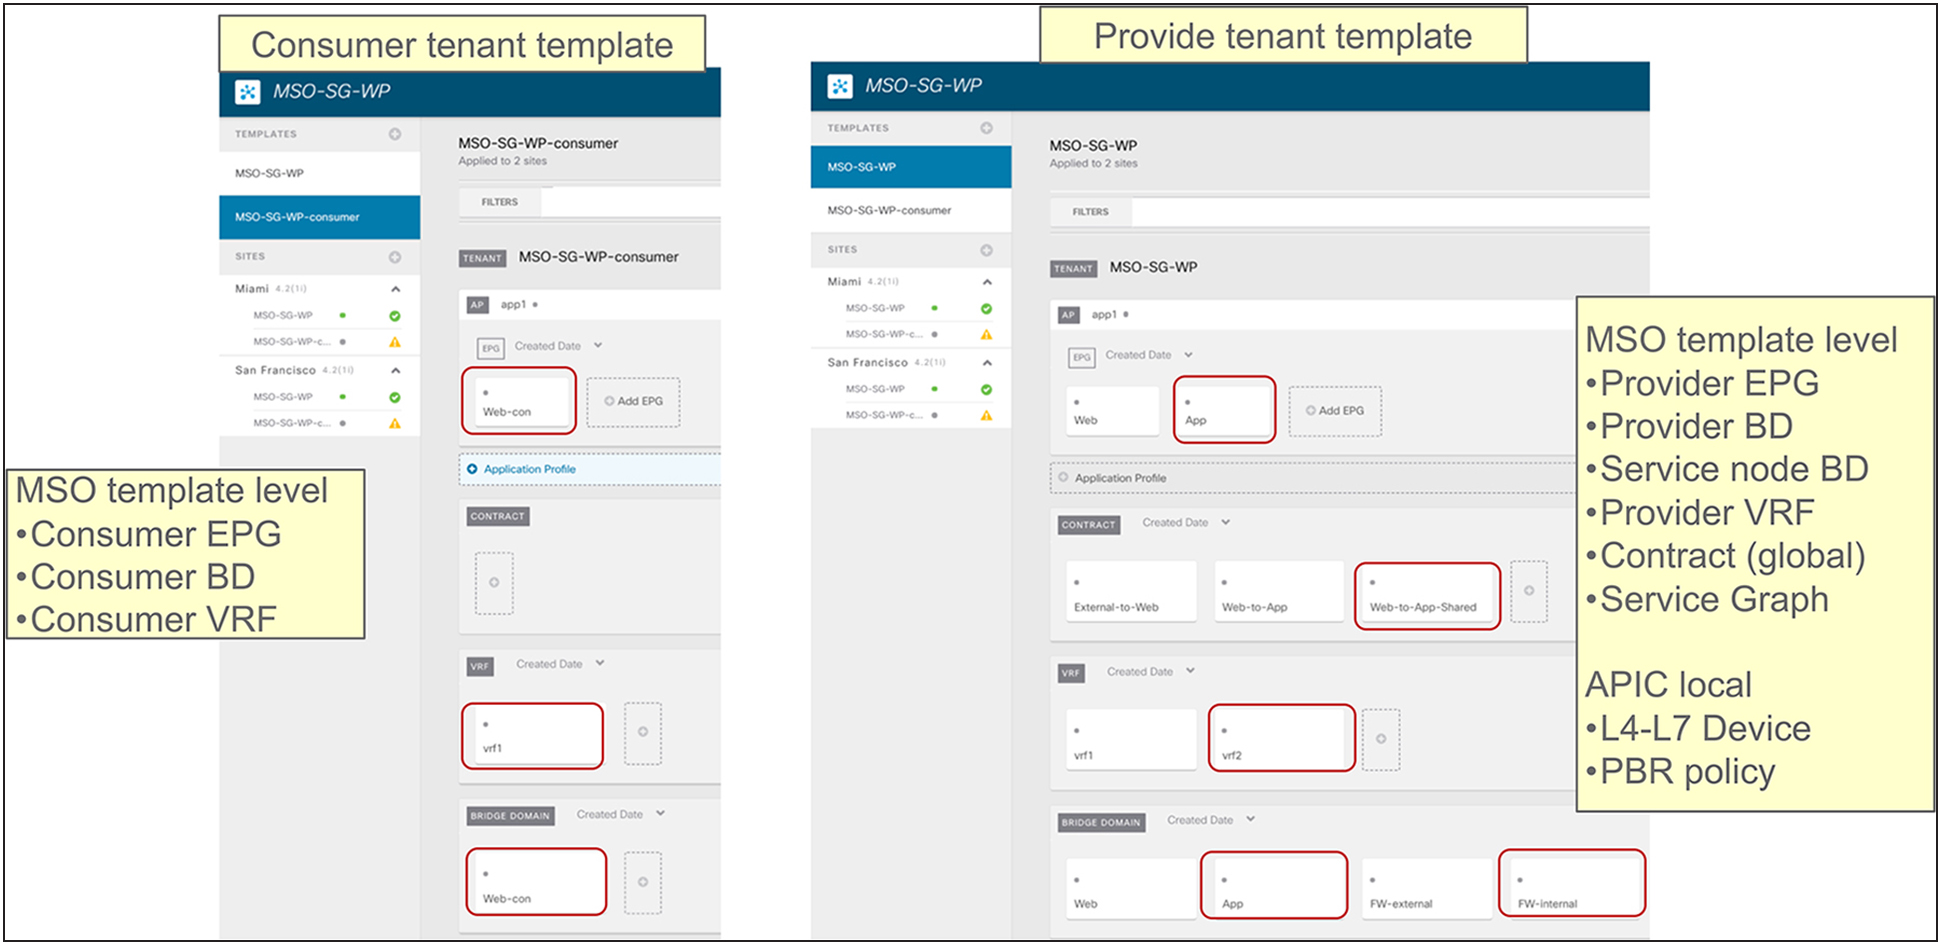 Consumer-tenant template and provider-tenant template (MSO-template level)